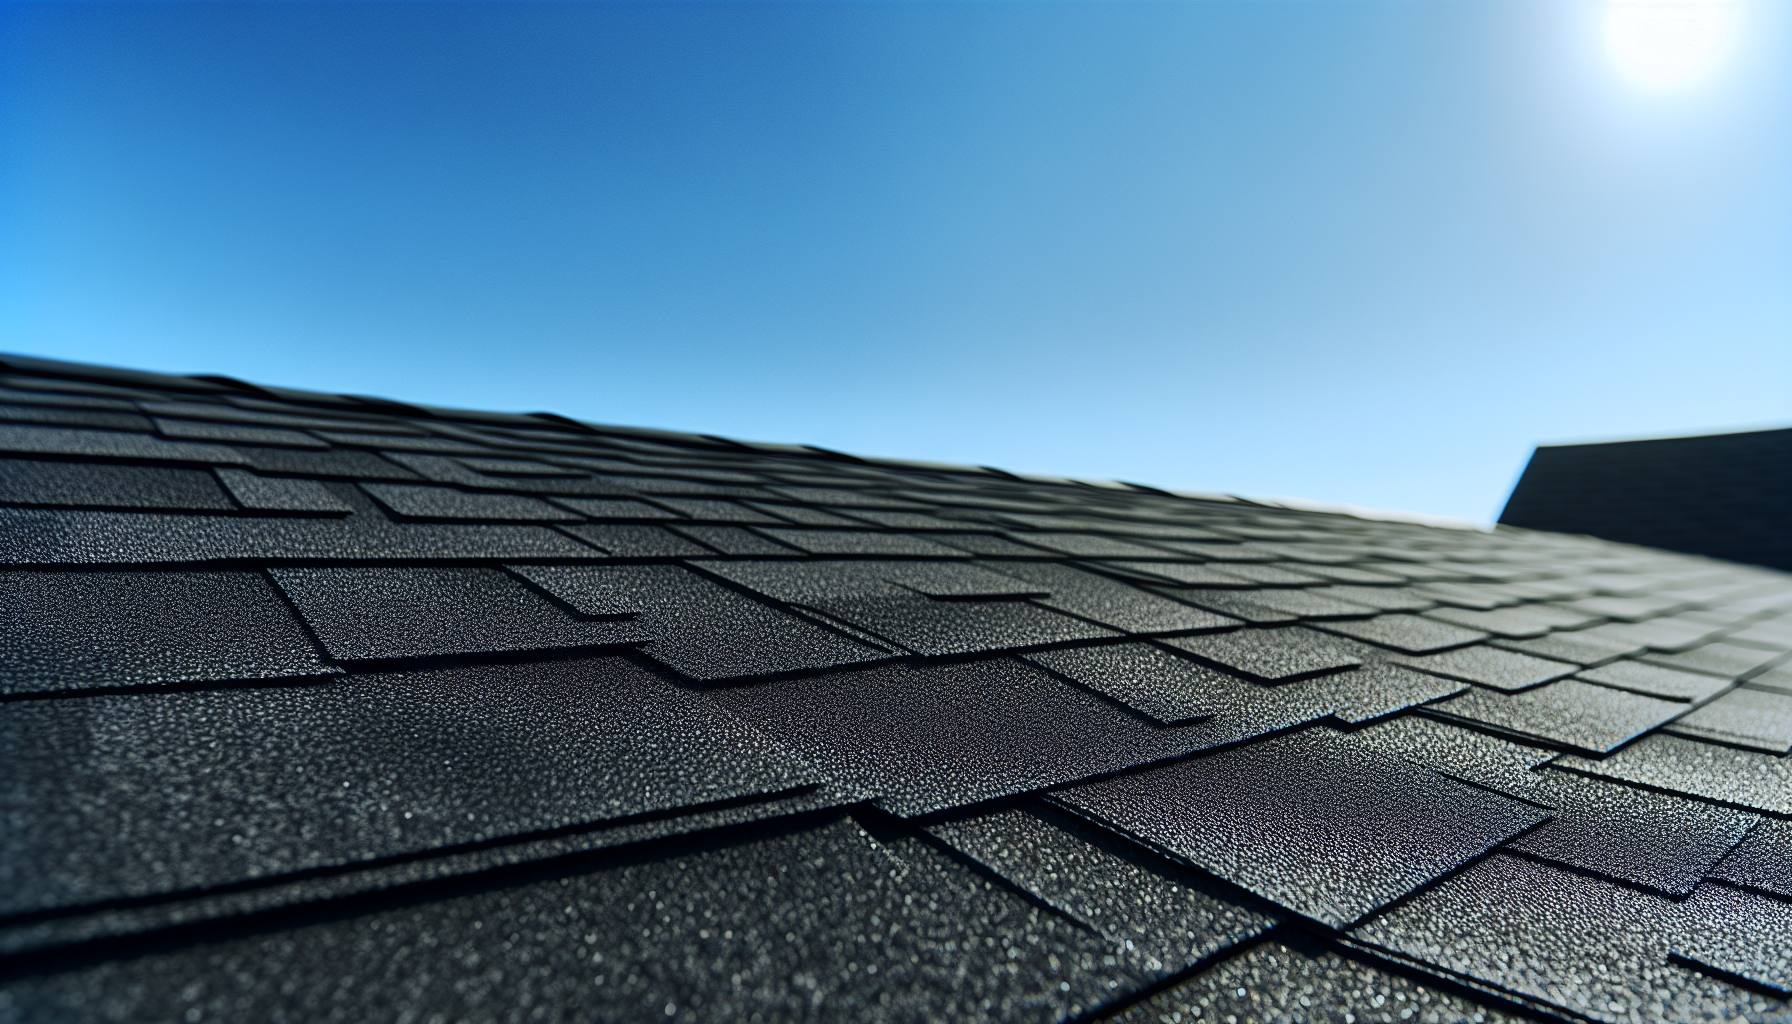 A newly installed asphalt roof with clean shingles